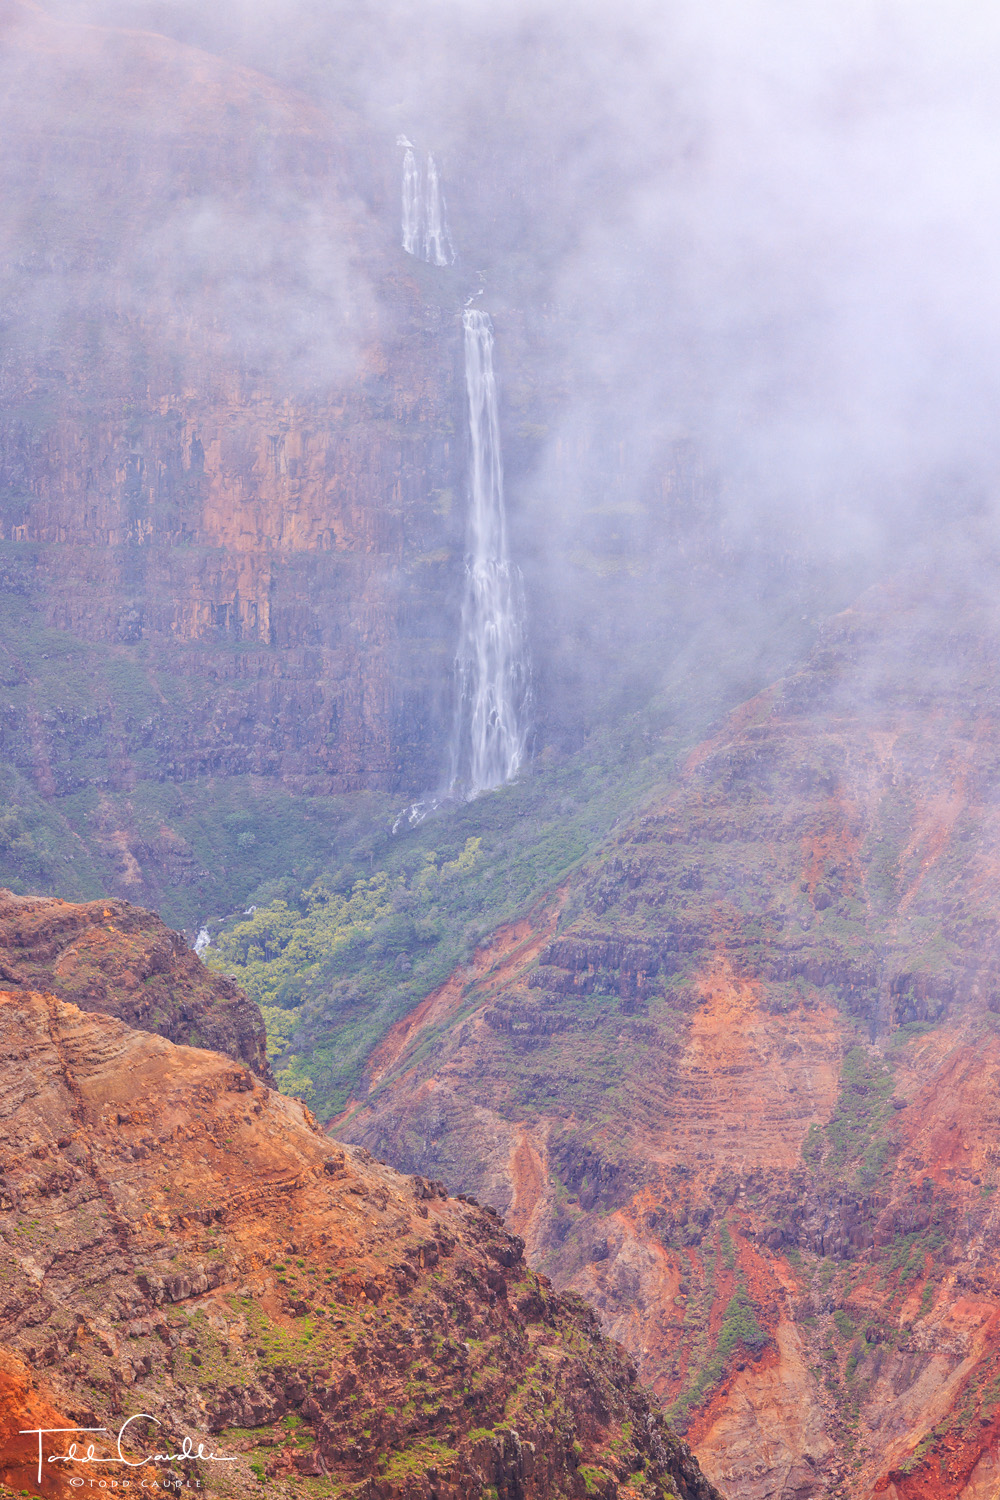 The fog begins to take over the view of Waipo'o Falls in Waimea Canyon State Park. Soon after this image was taken, the falls...